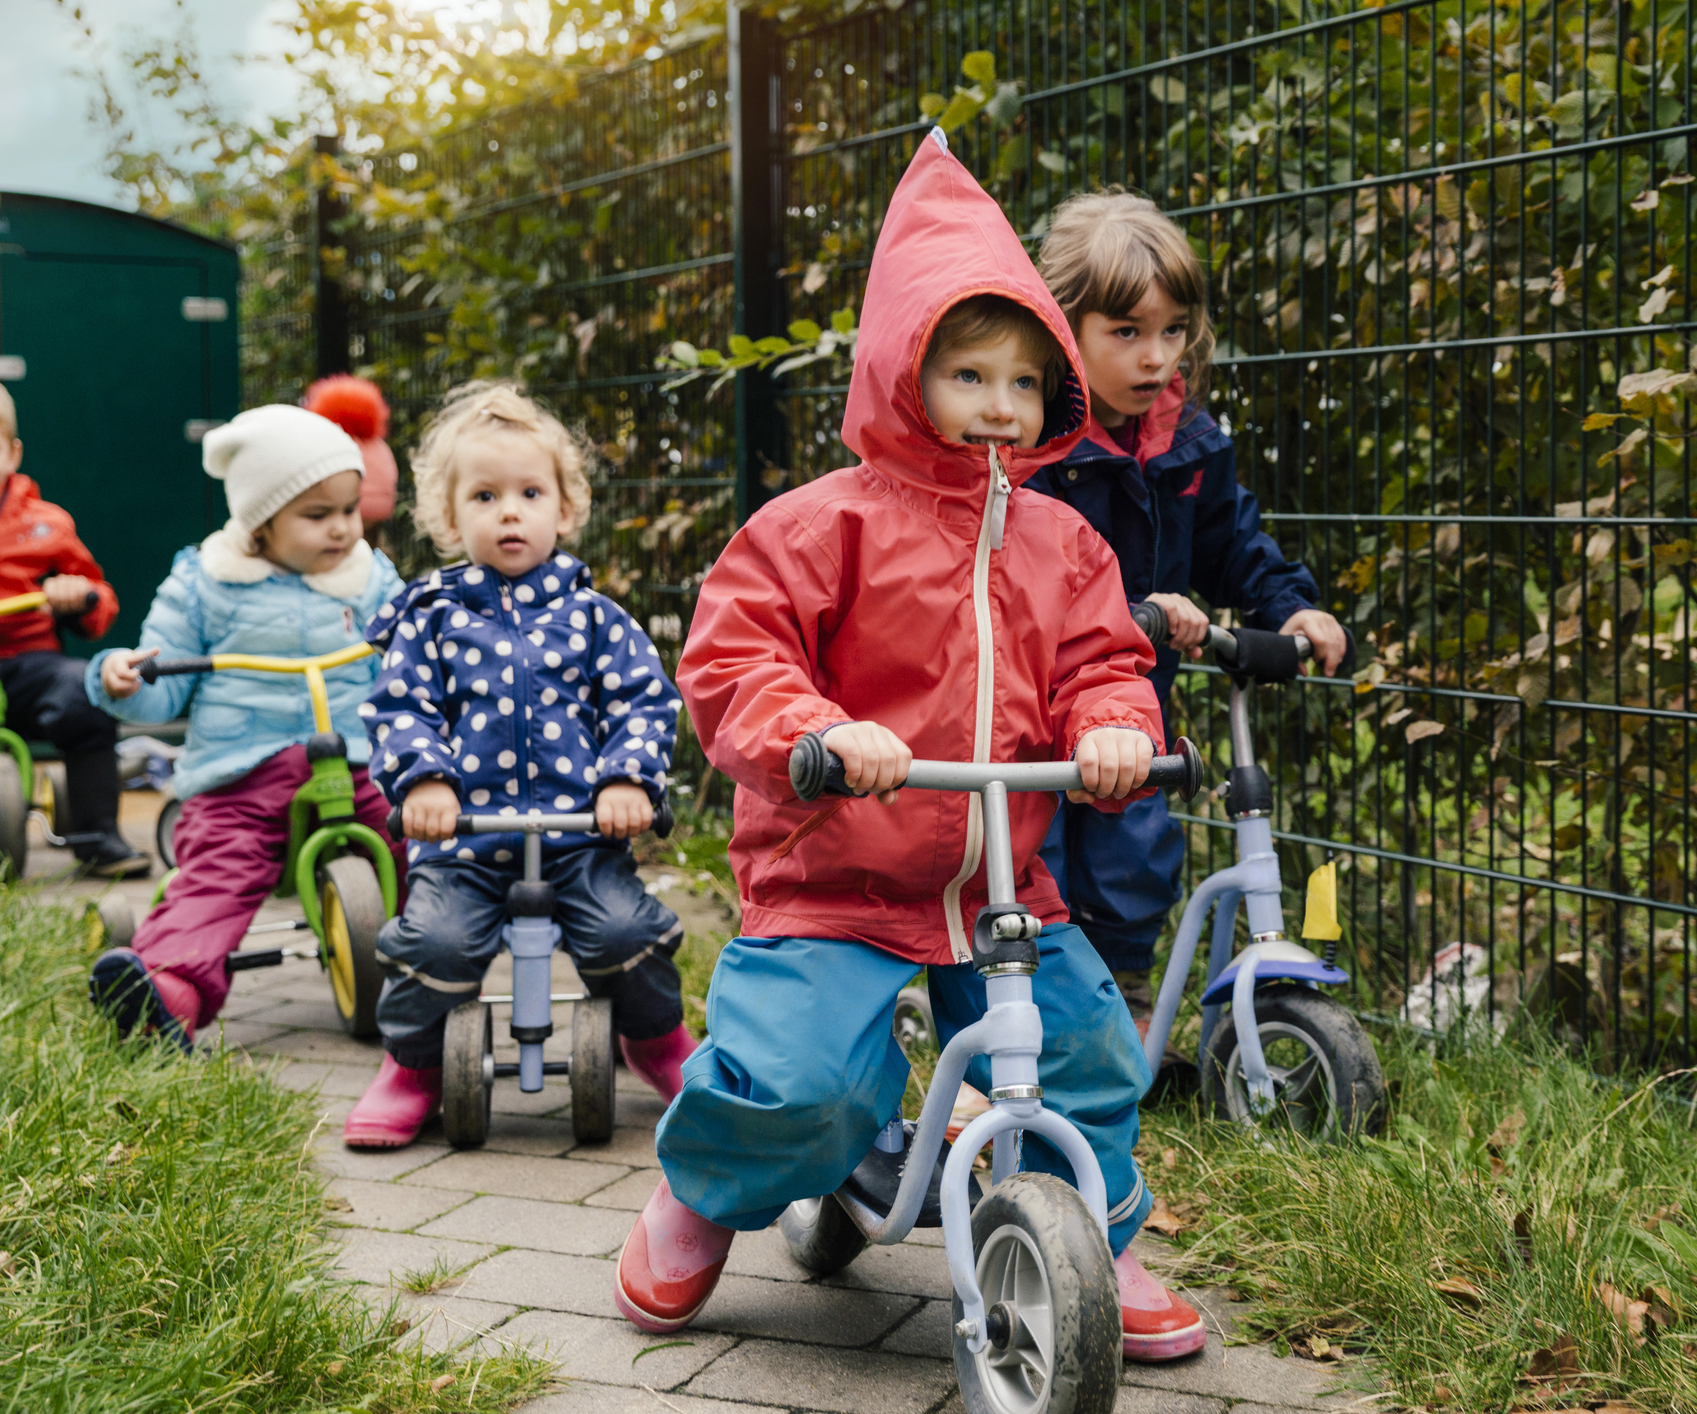 New WHO guidelines recommend kids under five need to be active for at least three hours a day